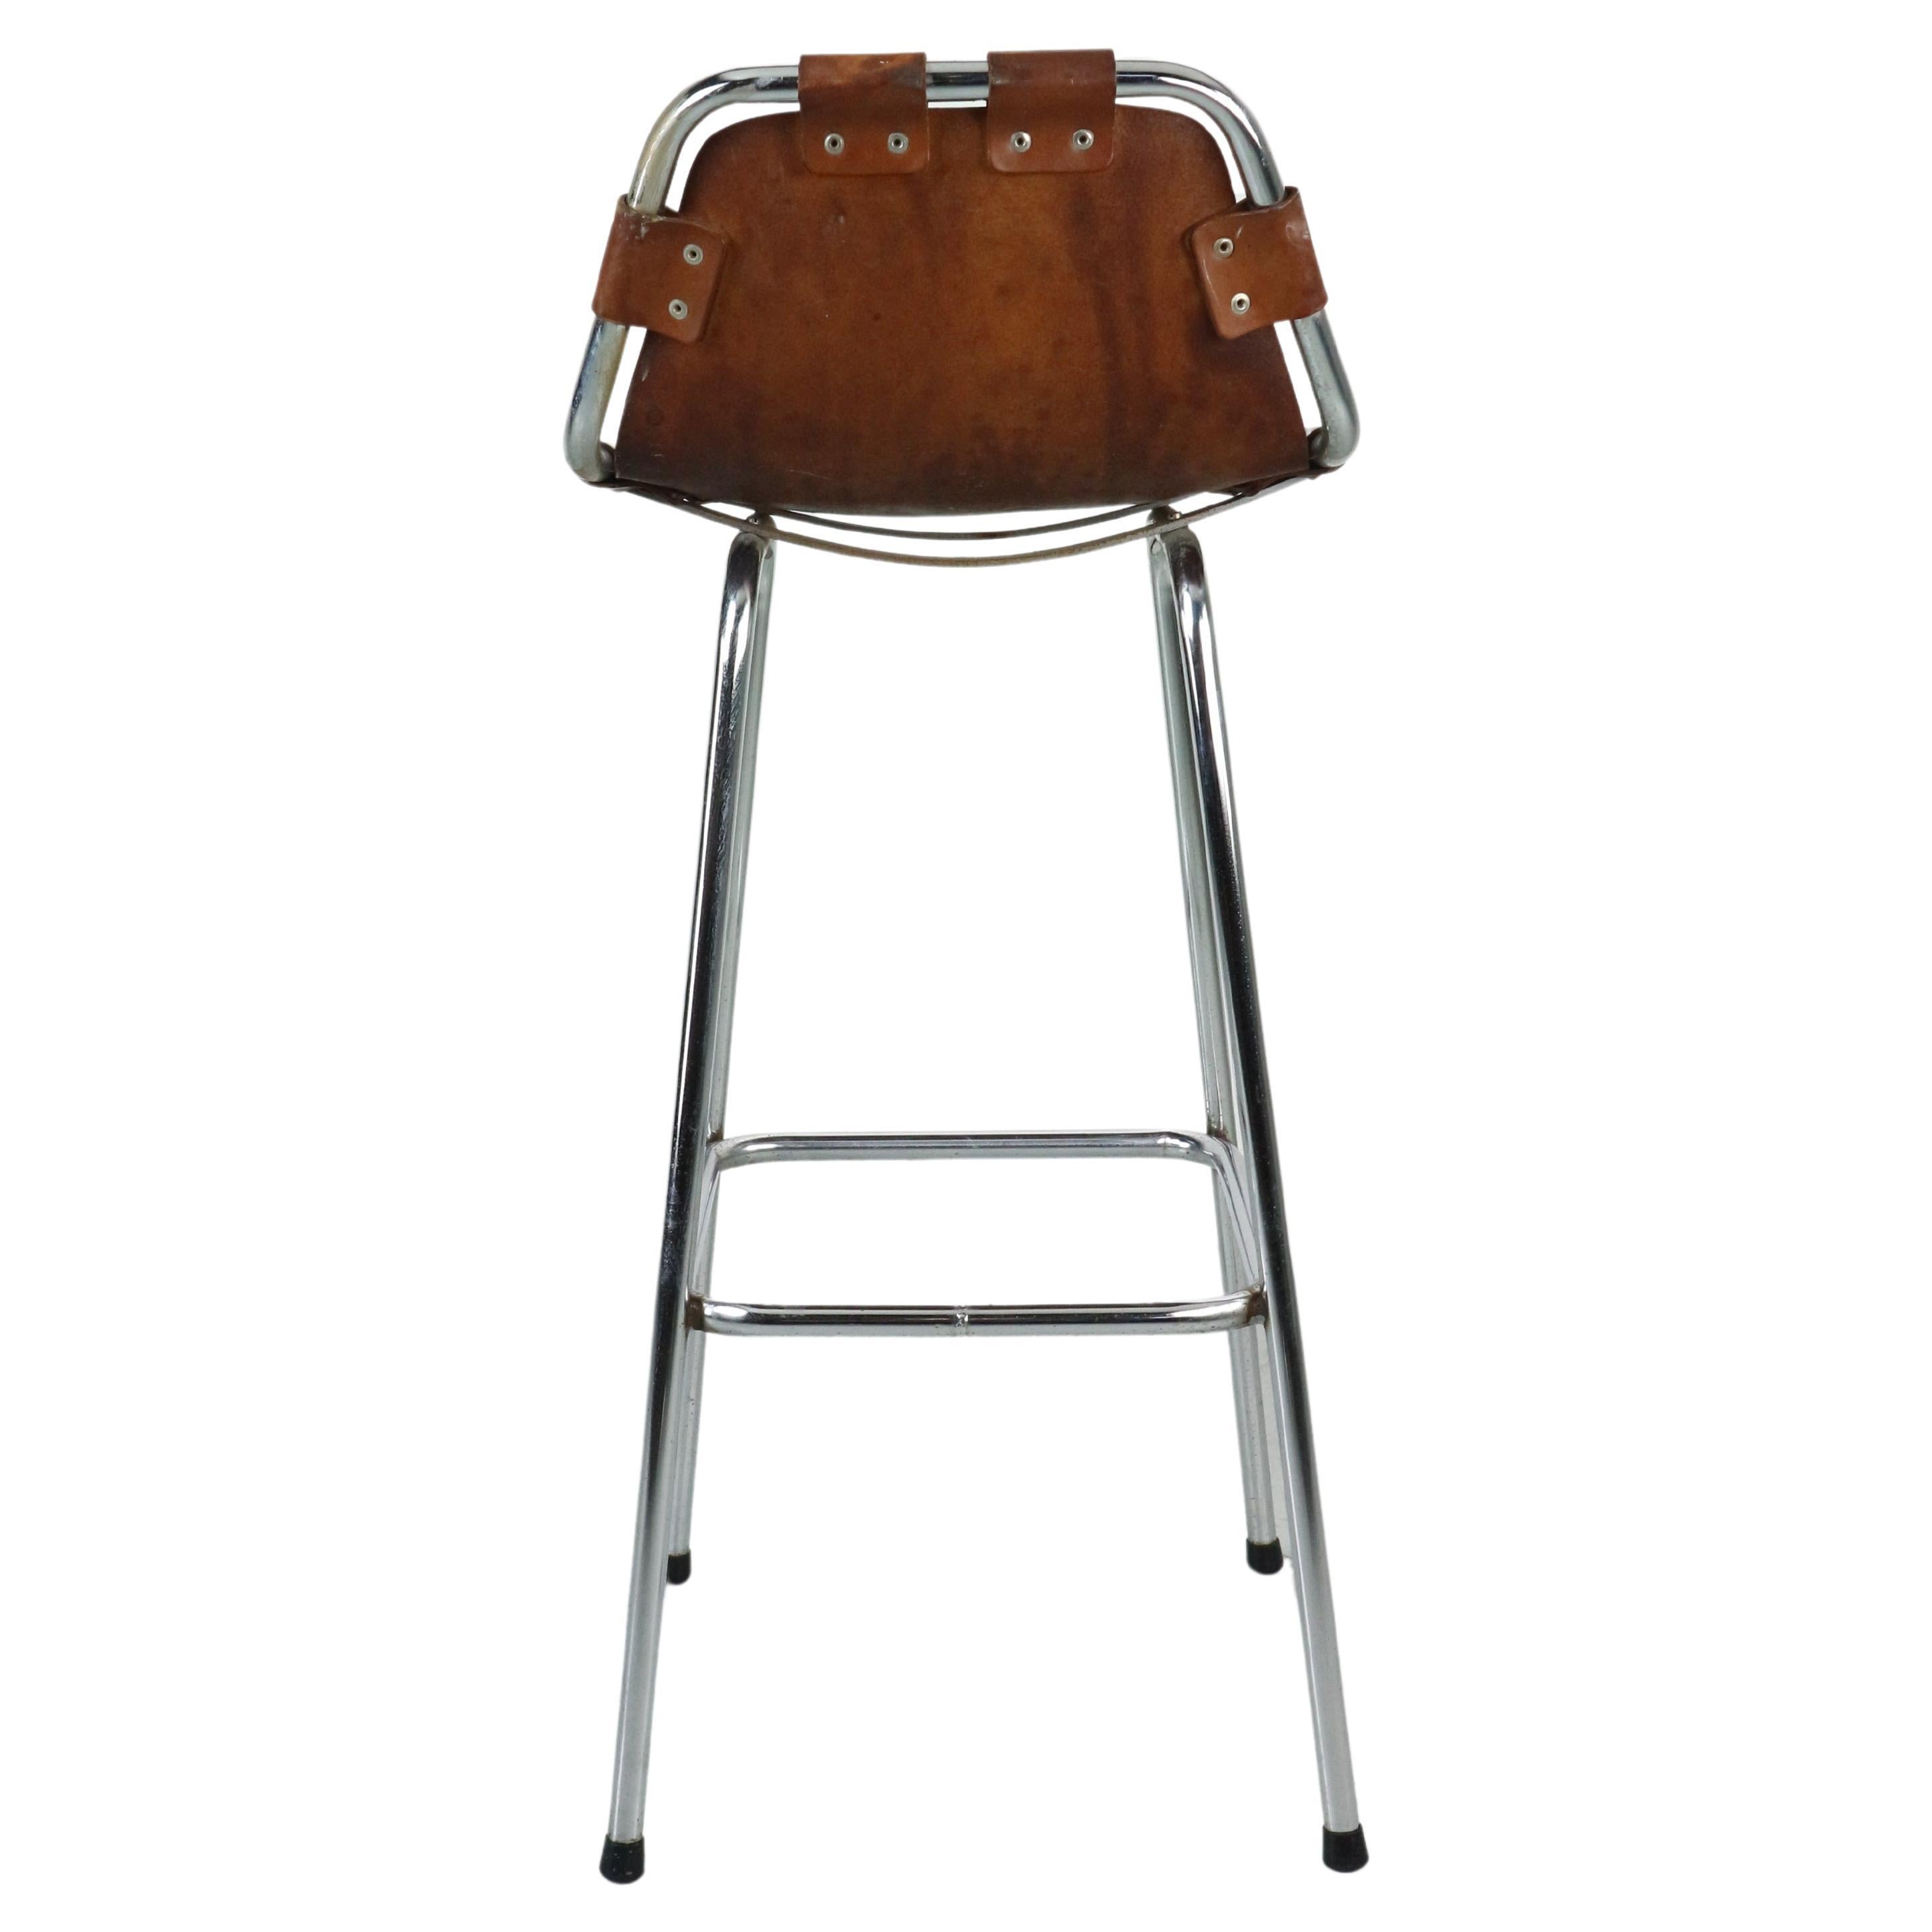 Charlotte Perriand for "Les Arc" Original Leather Barstool, 1960 For Sale